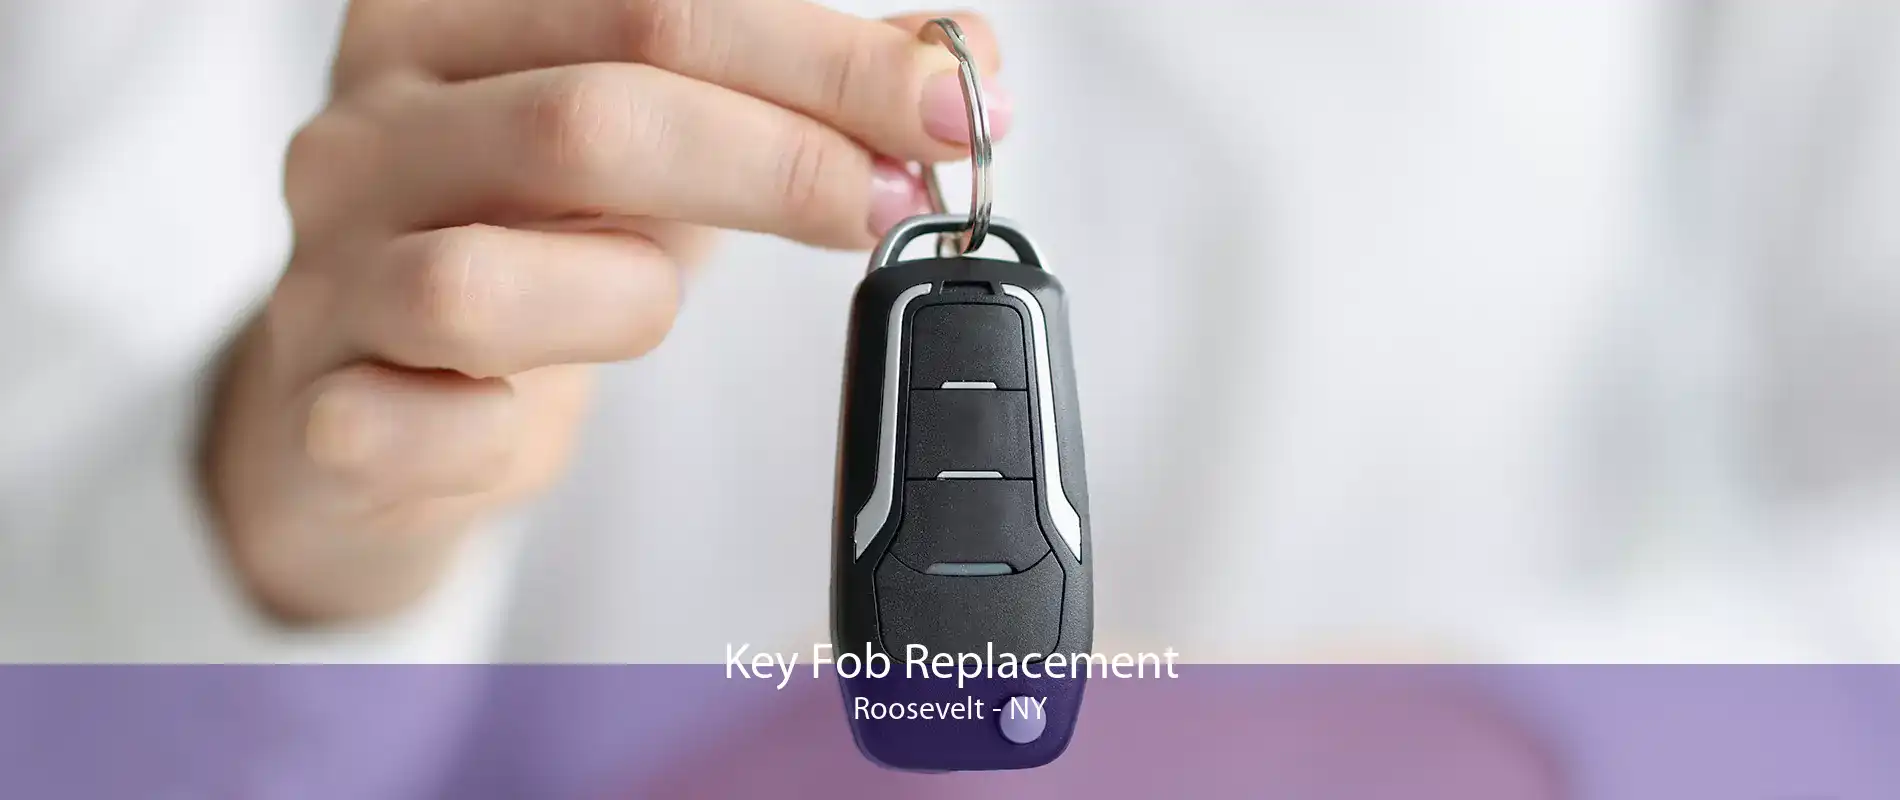 Key Fob Replacement Roosevelt - NY